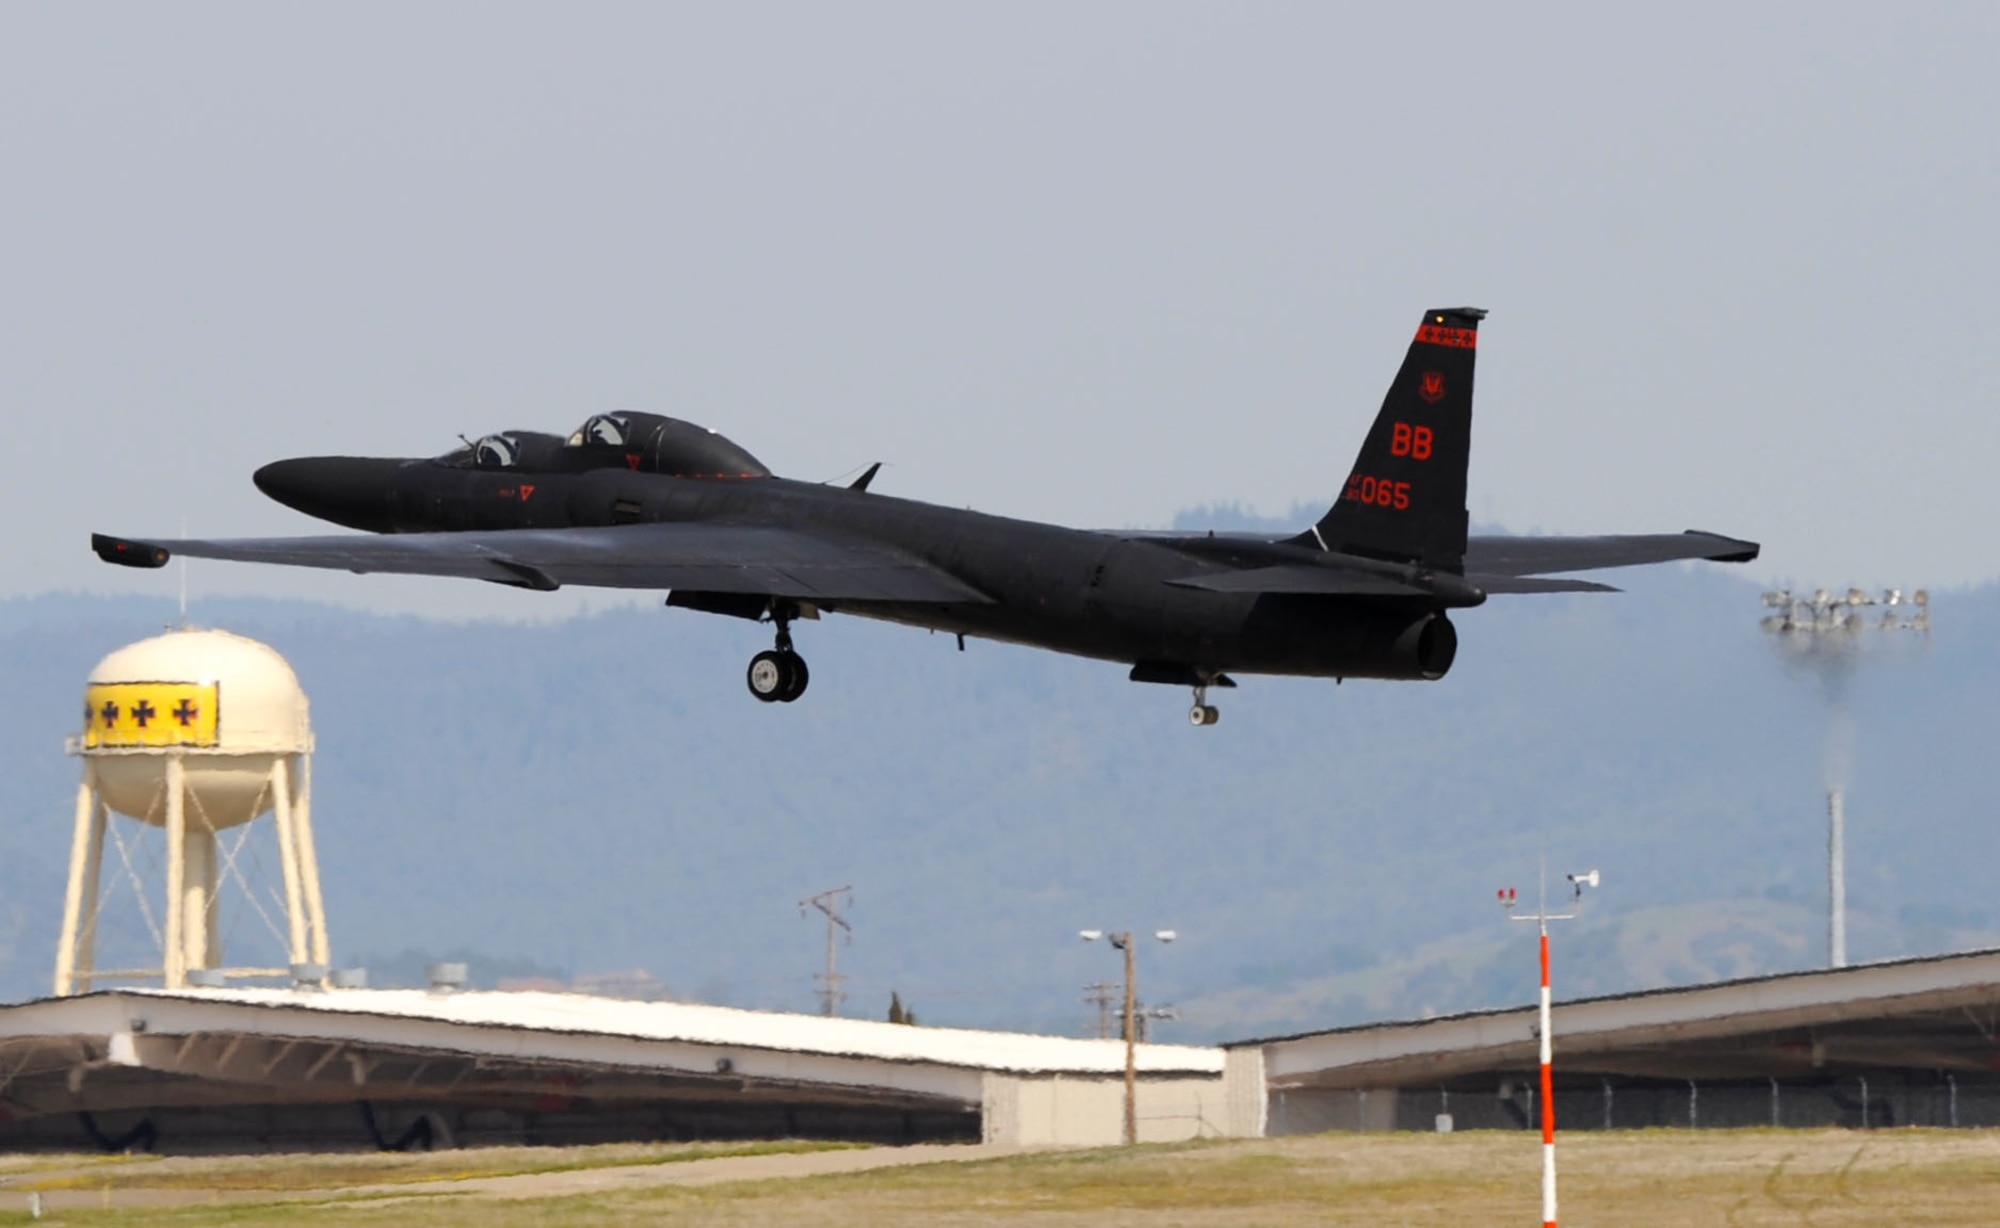 A U-2 “Dragon Lady” takes off from Beale Air Force Base, Calif., March 15, 2013. U-2 pilots train at Beale using two-seat aircraft before deploying for operational missions. The four black crosses on the tower in the background represent four WWI offensives in which squadrons later assigned to the 9th Wing participated. (U.S. Air Force photo by Airman 1st Class Bobby Cummings/Released